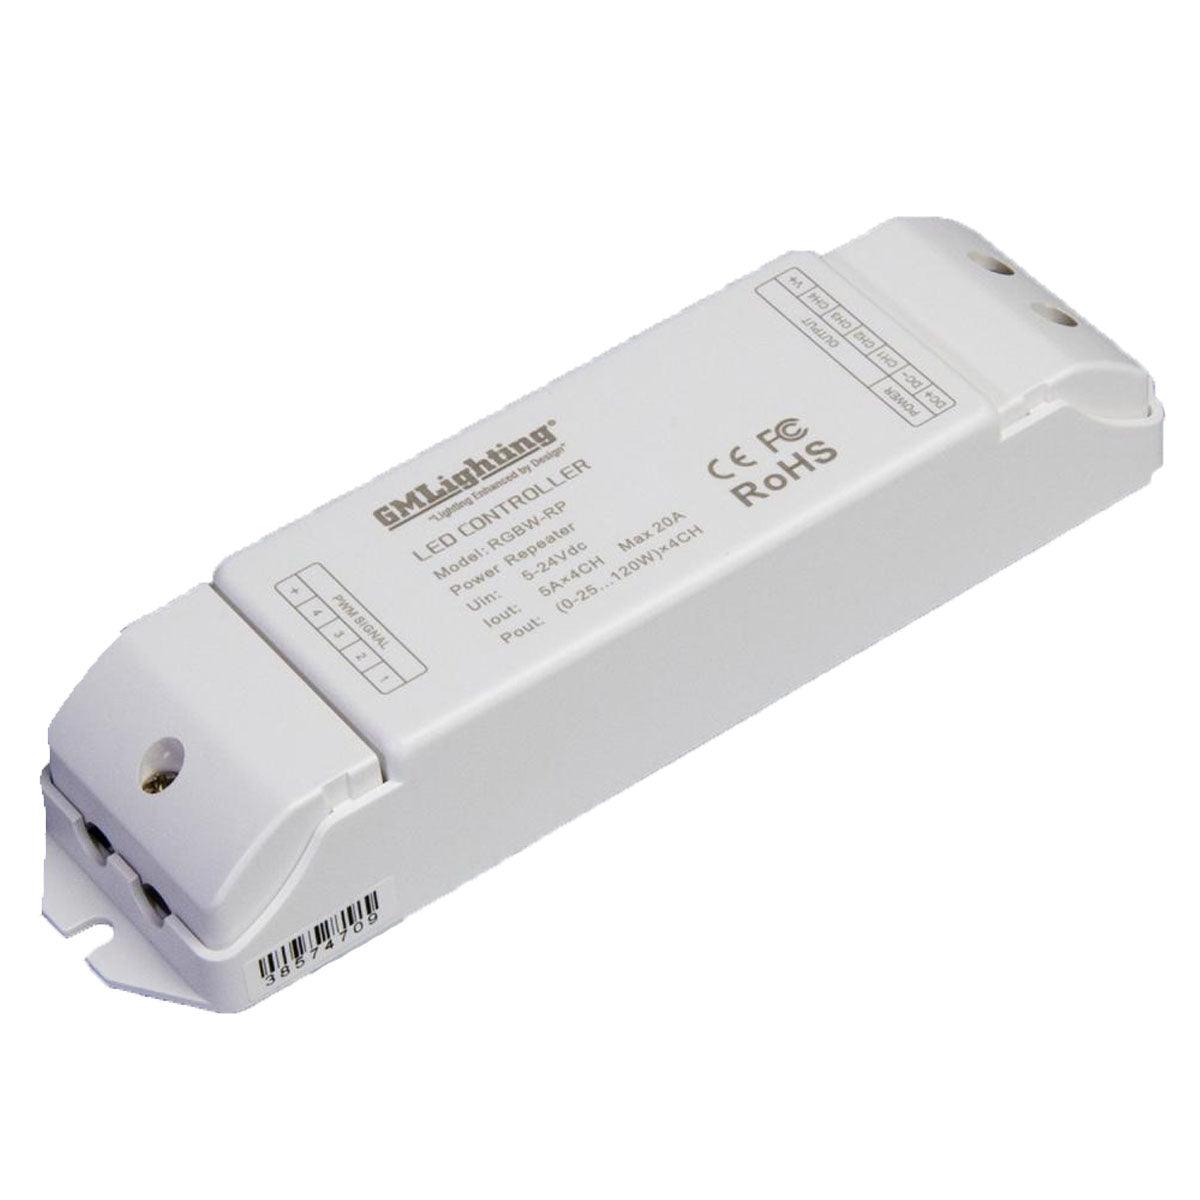 RGBW LED Repeater For LTR RGBW Strip Lights, 4 Channels - Bees Lighting